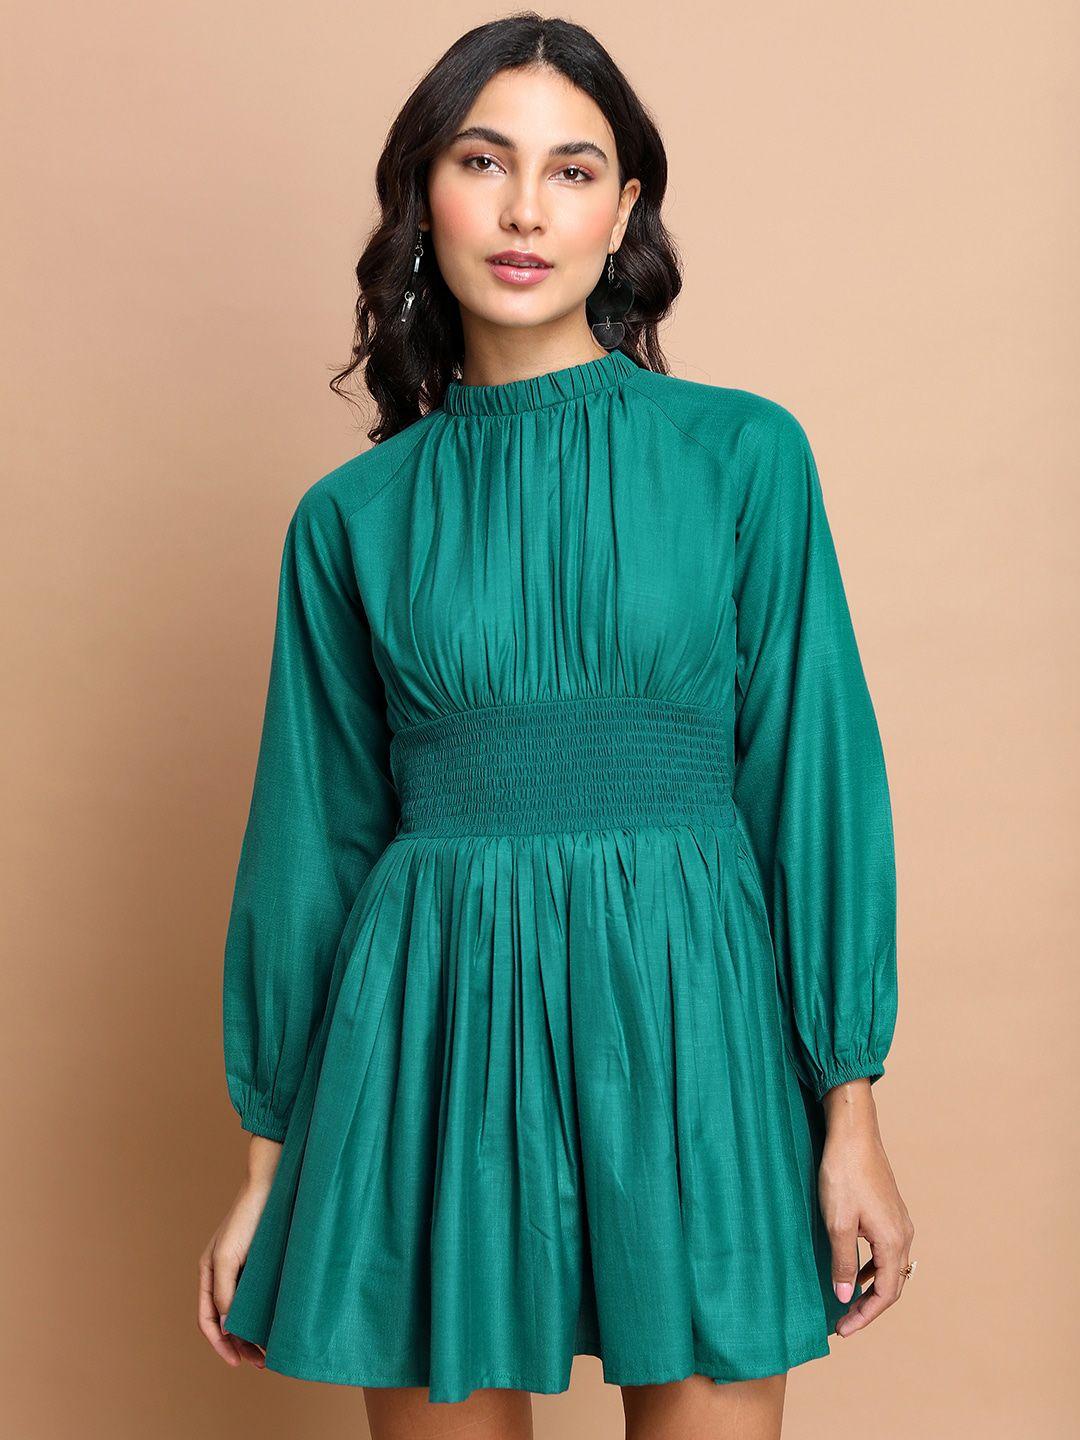 tokyo talkies teal high neck puff sleeves smocked fit & flare dress